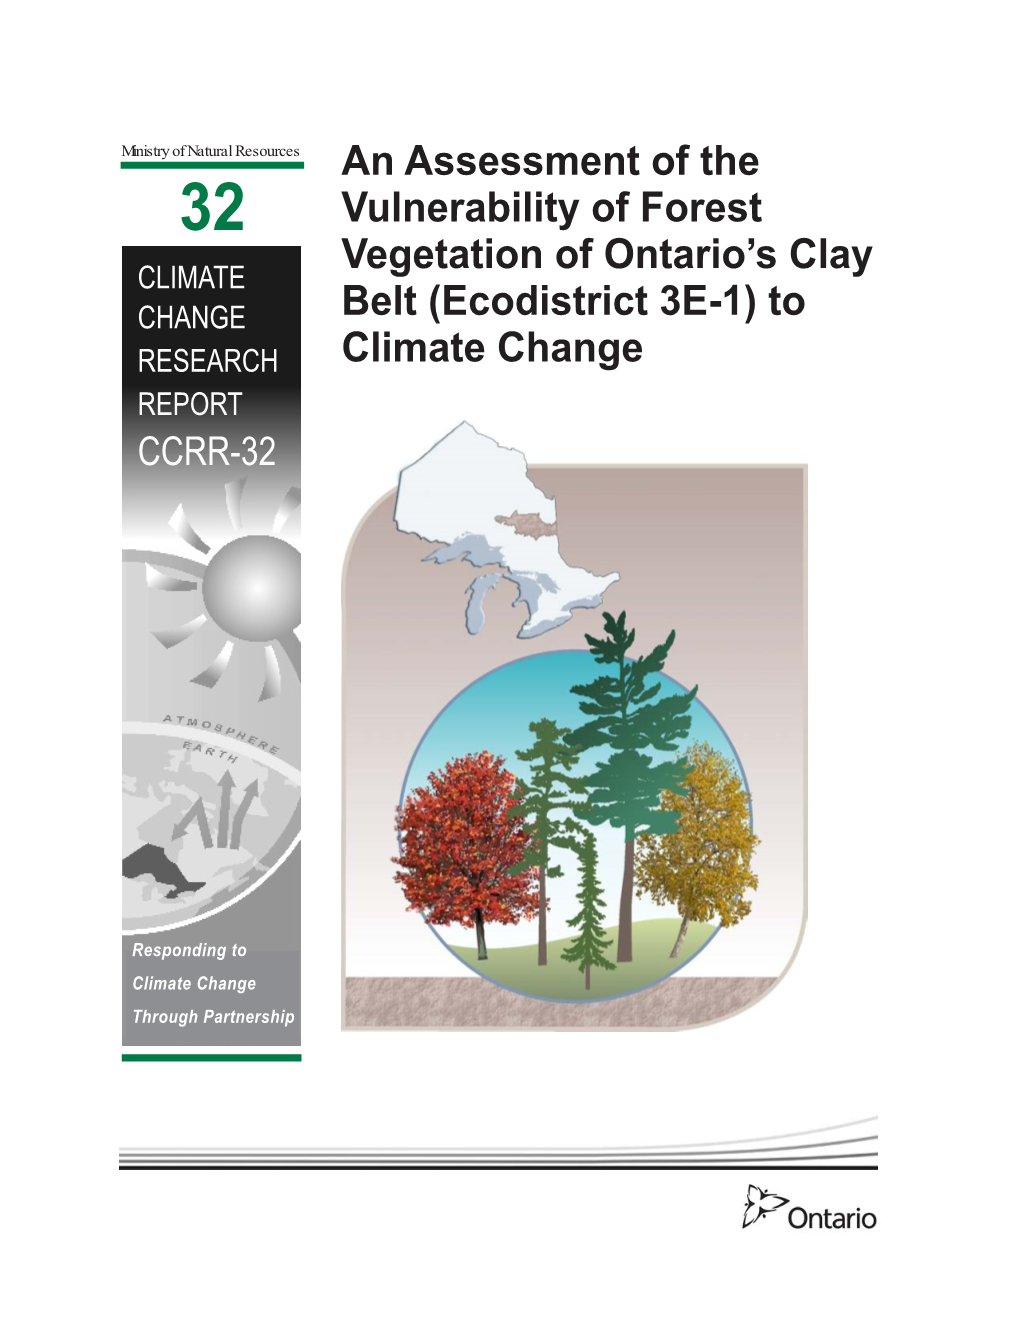 An Assessment of the Vulnerability of Forest Vegetation of Ontario's Clay Belt